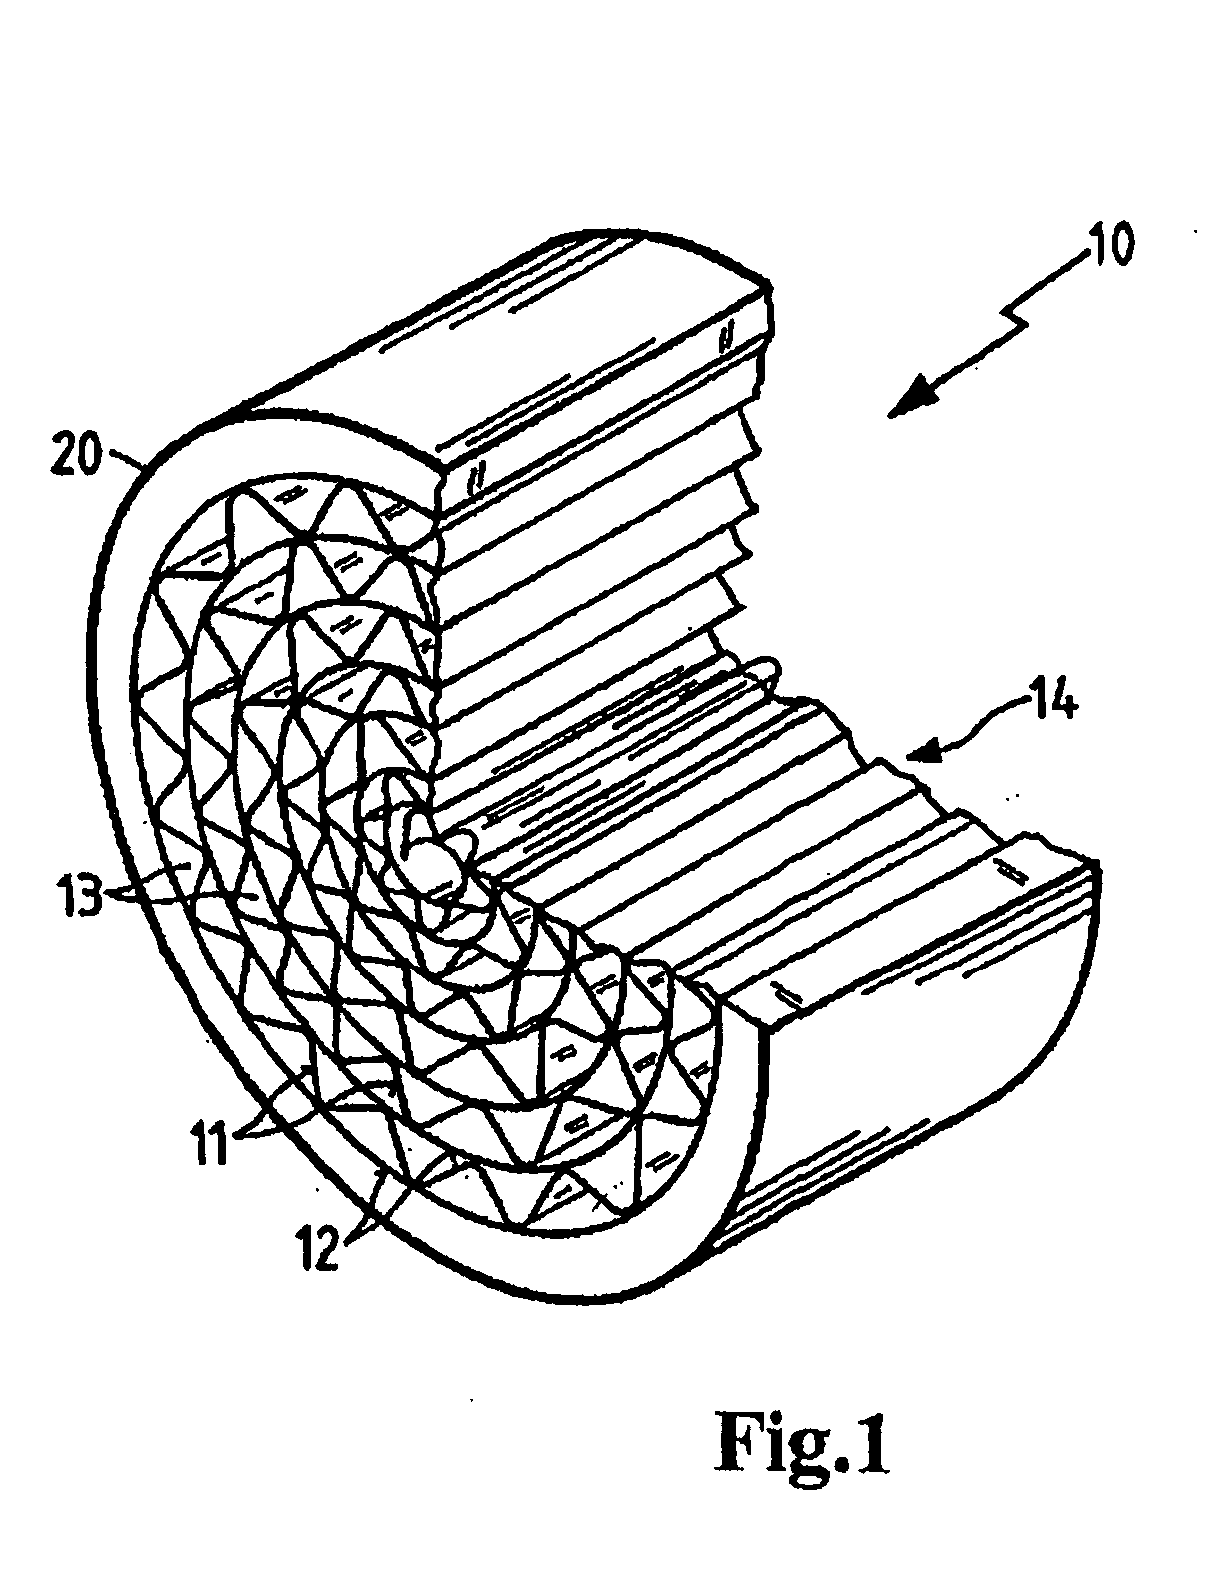 Adsorber for adsorbing hydrocarbon vapors from return flows through an intake tract of an internal combustion engine